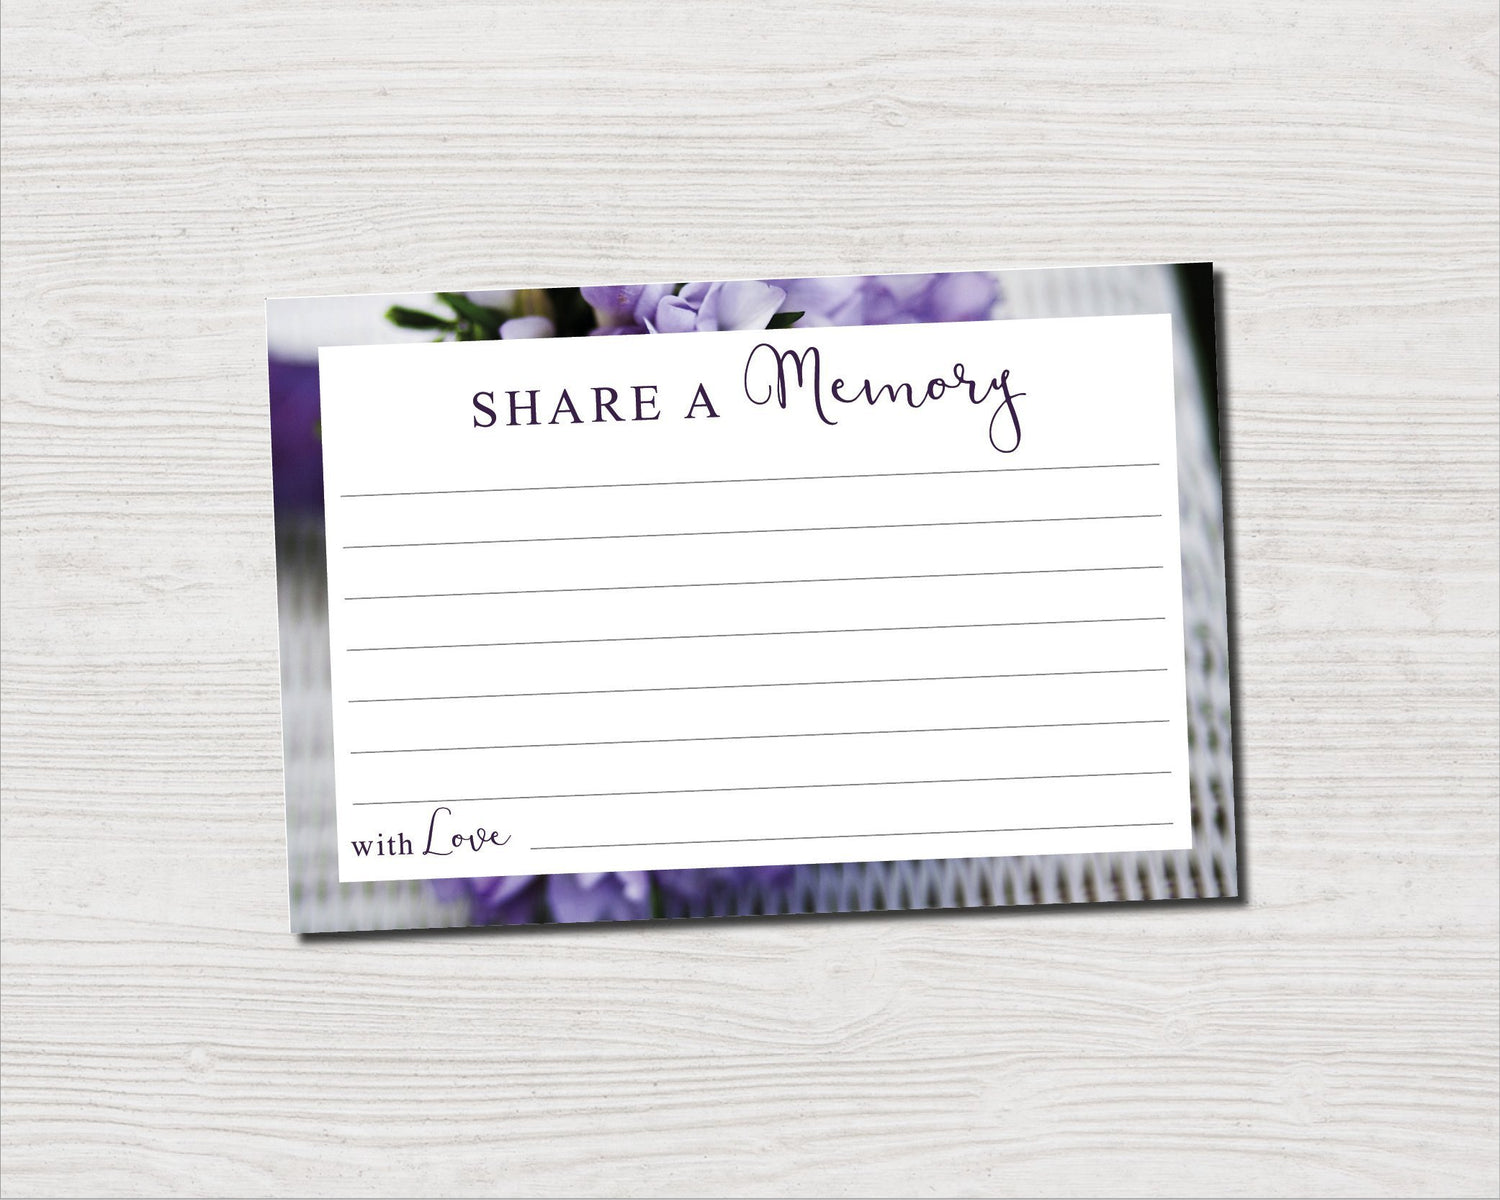 Purple Bouquet Share a Memory Sign and Cards